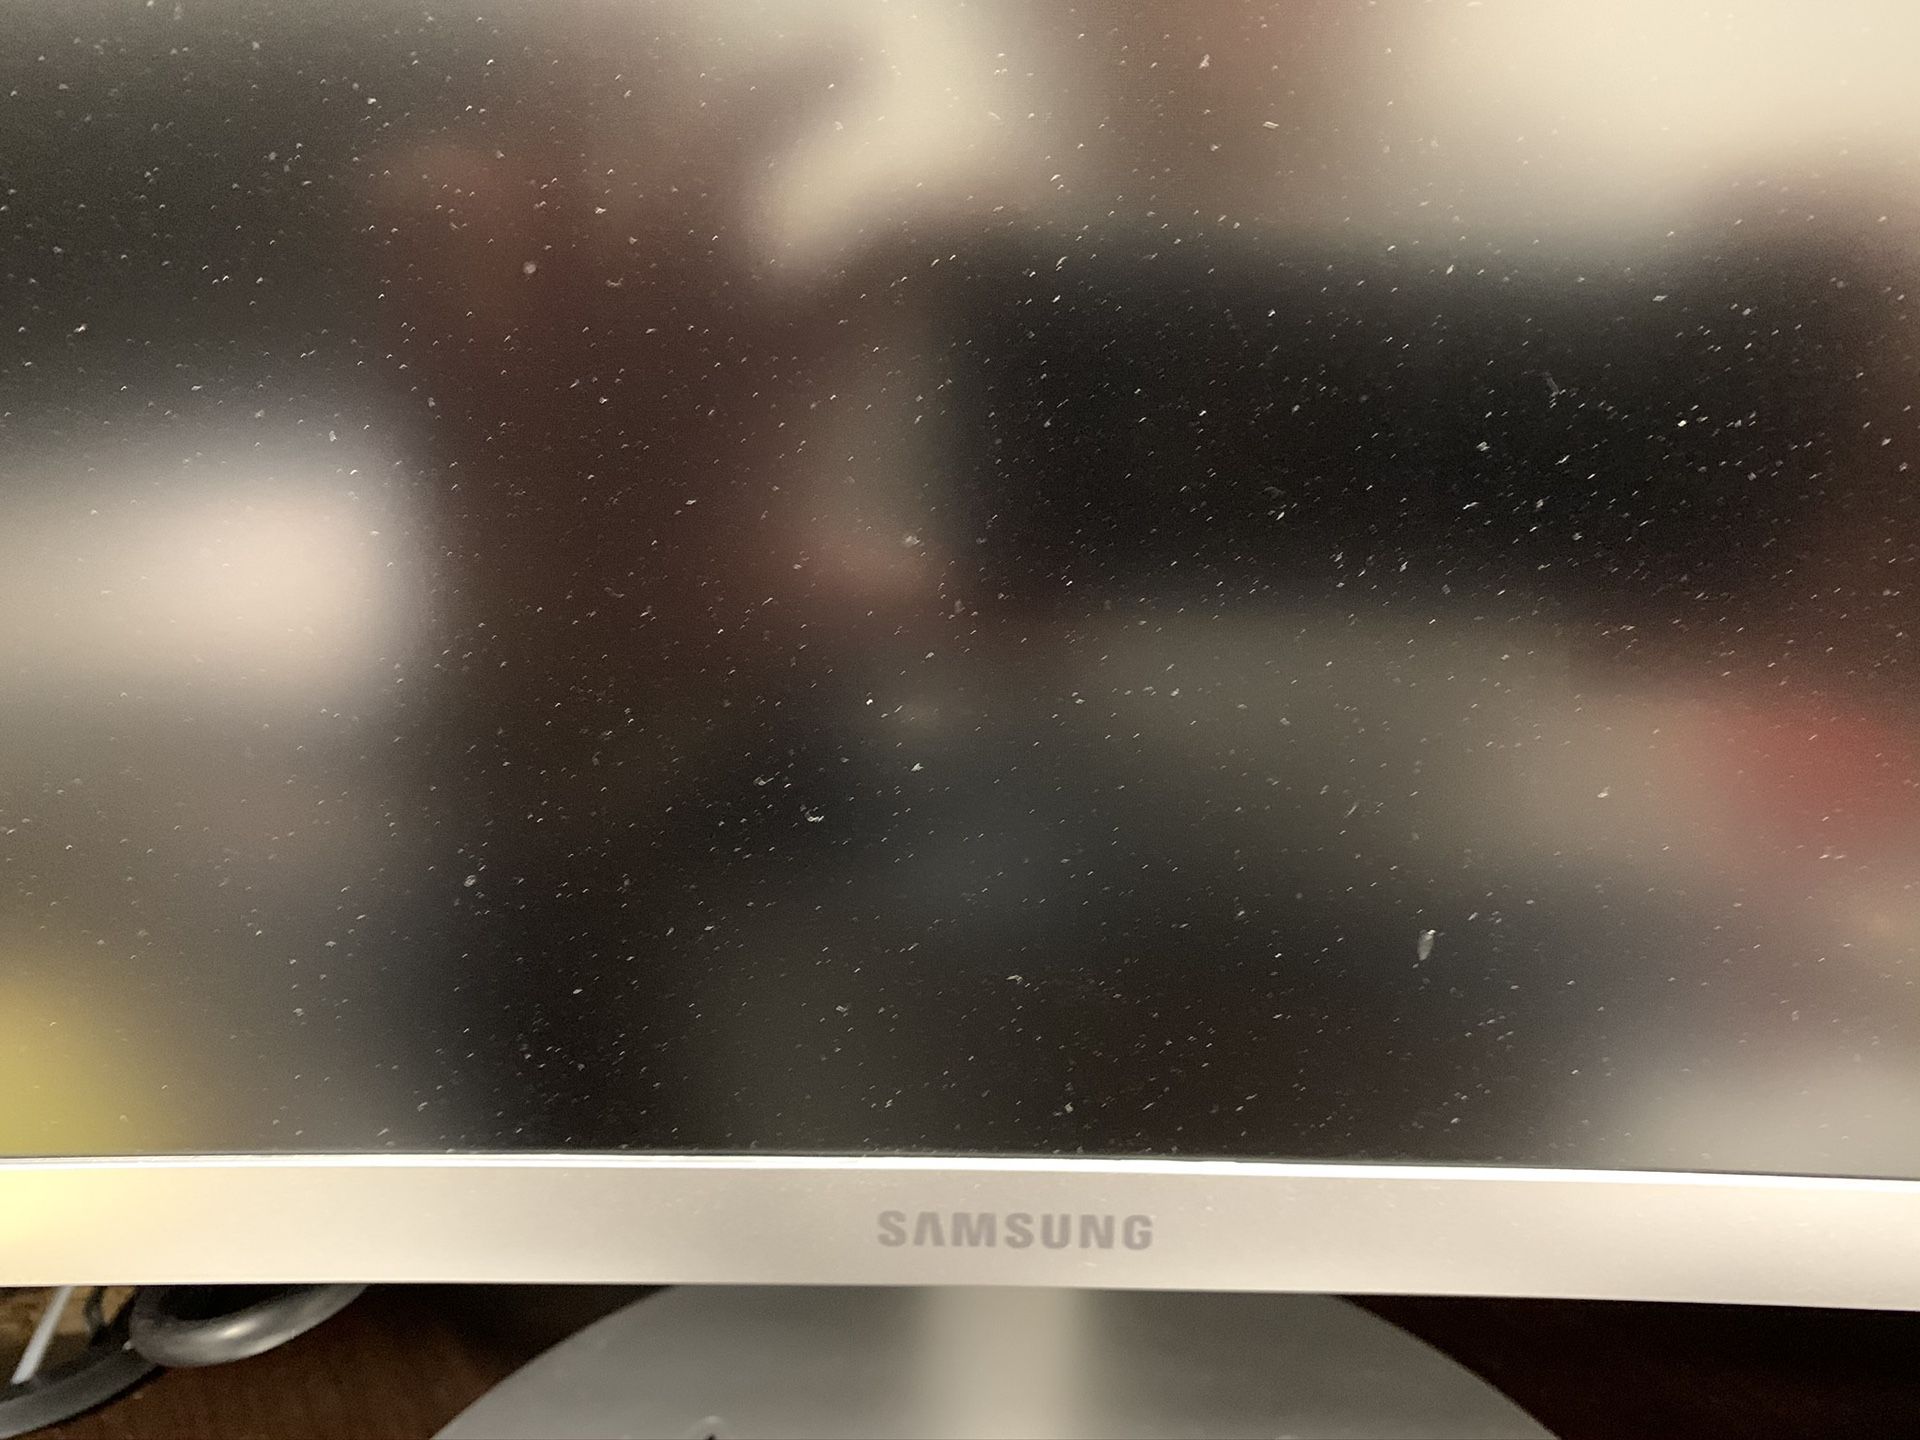 Samsung curved monitor 27”